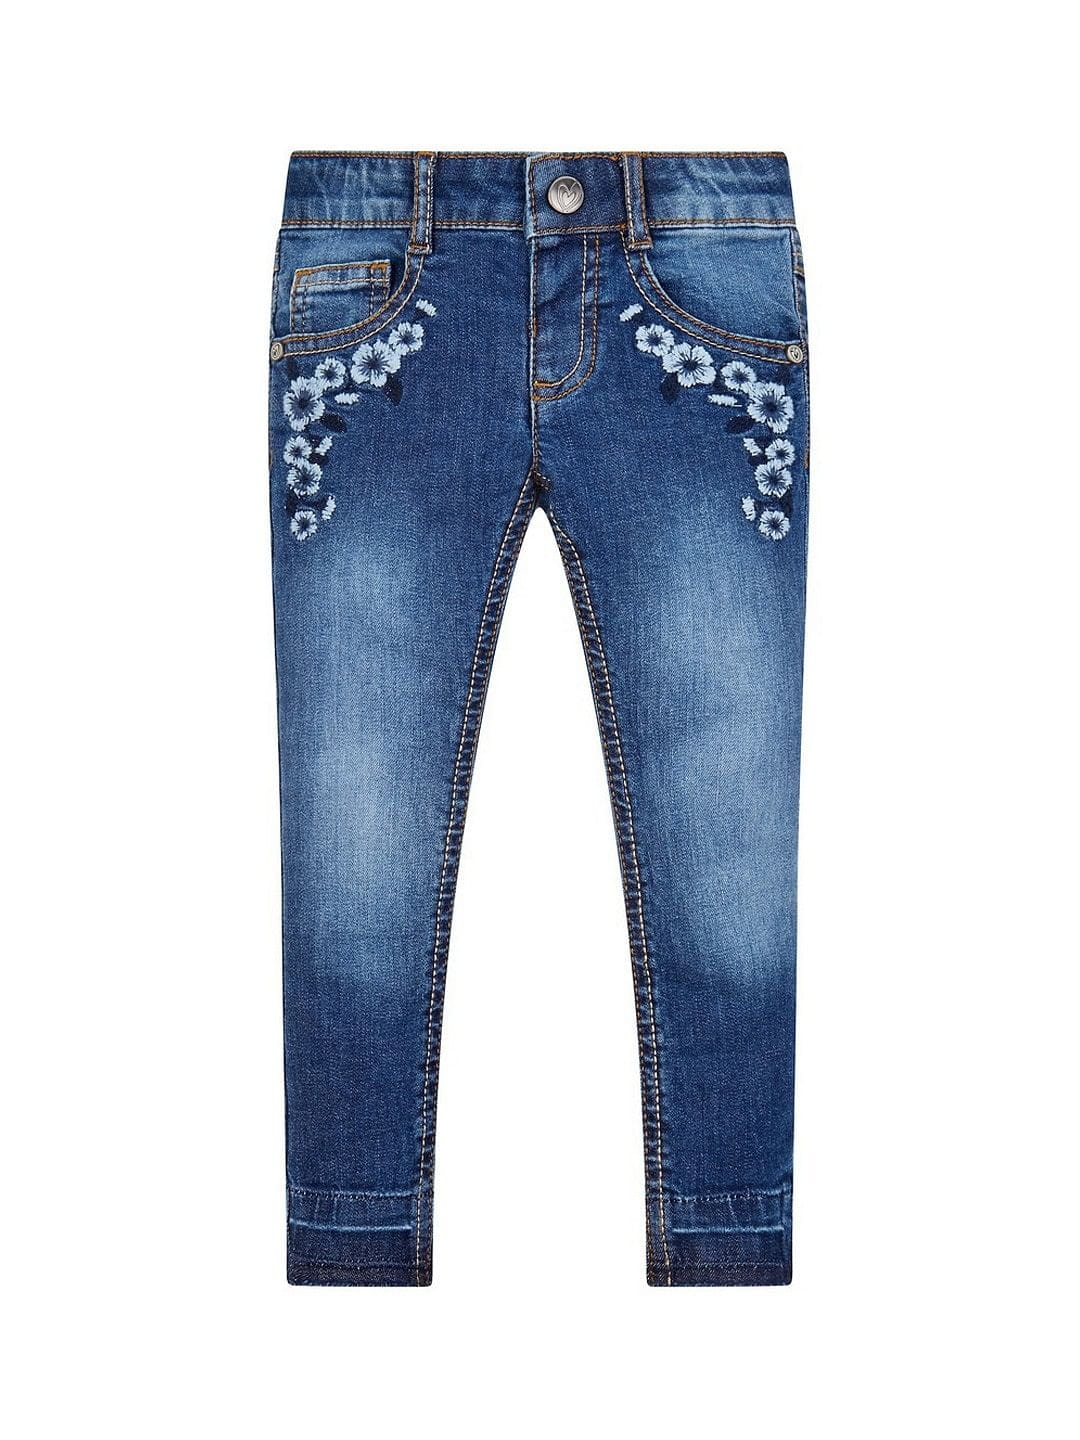 Mothercare | Floral Embroidered Jeans 0